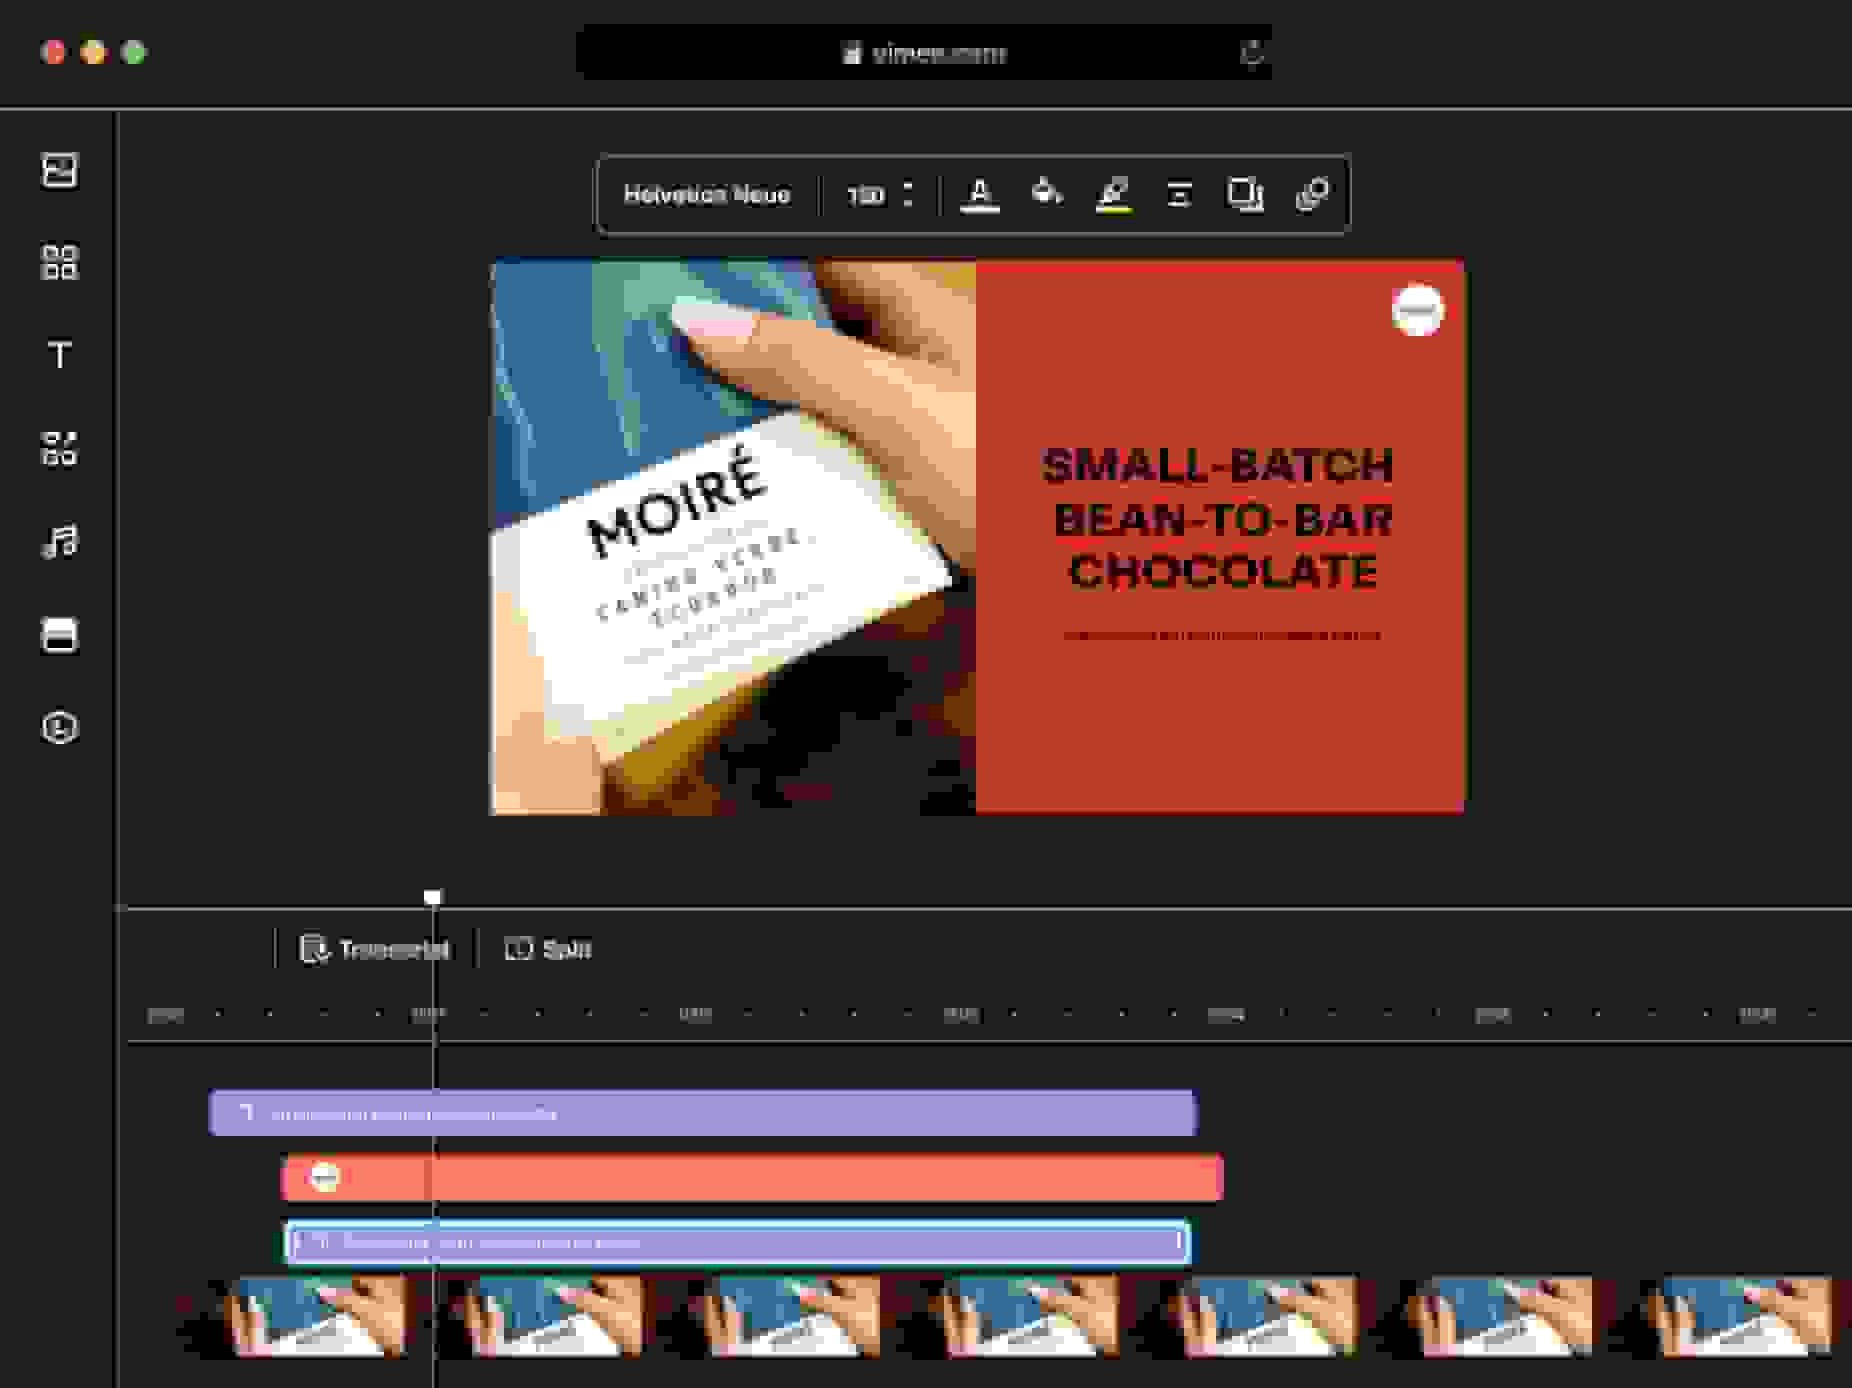 Editing a video in your browser using Vimeo